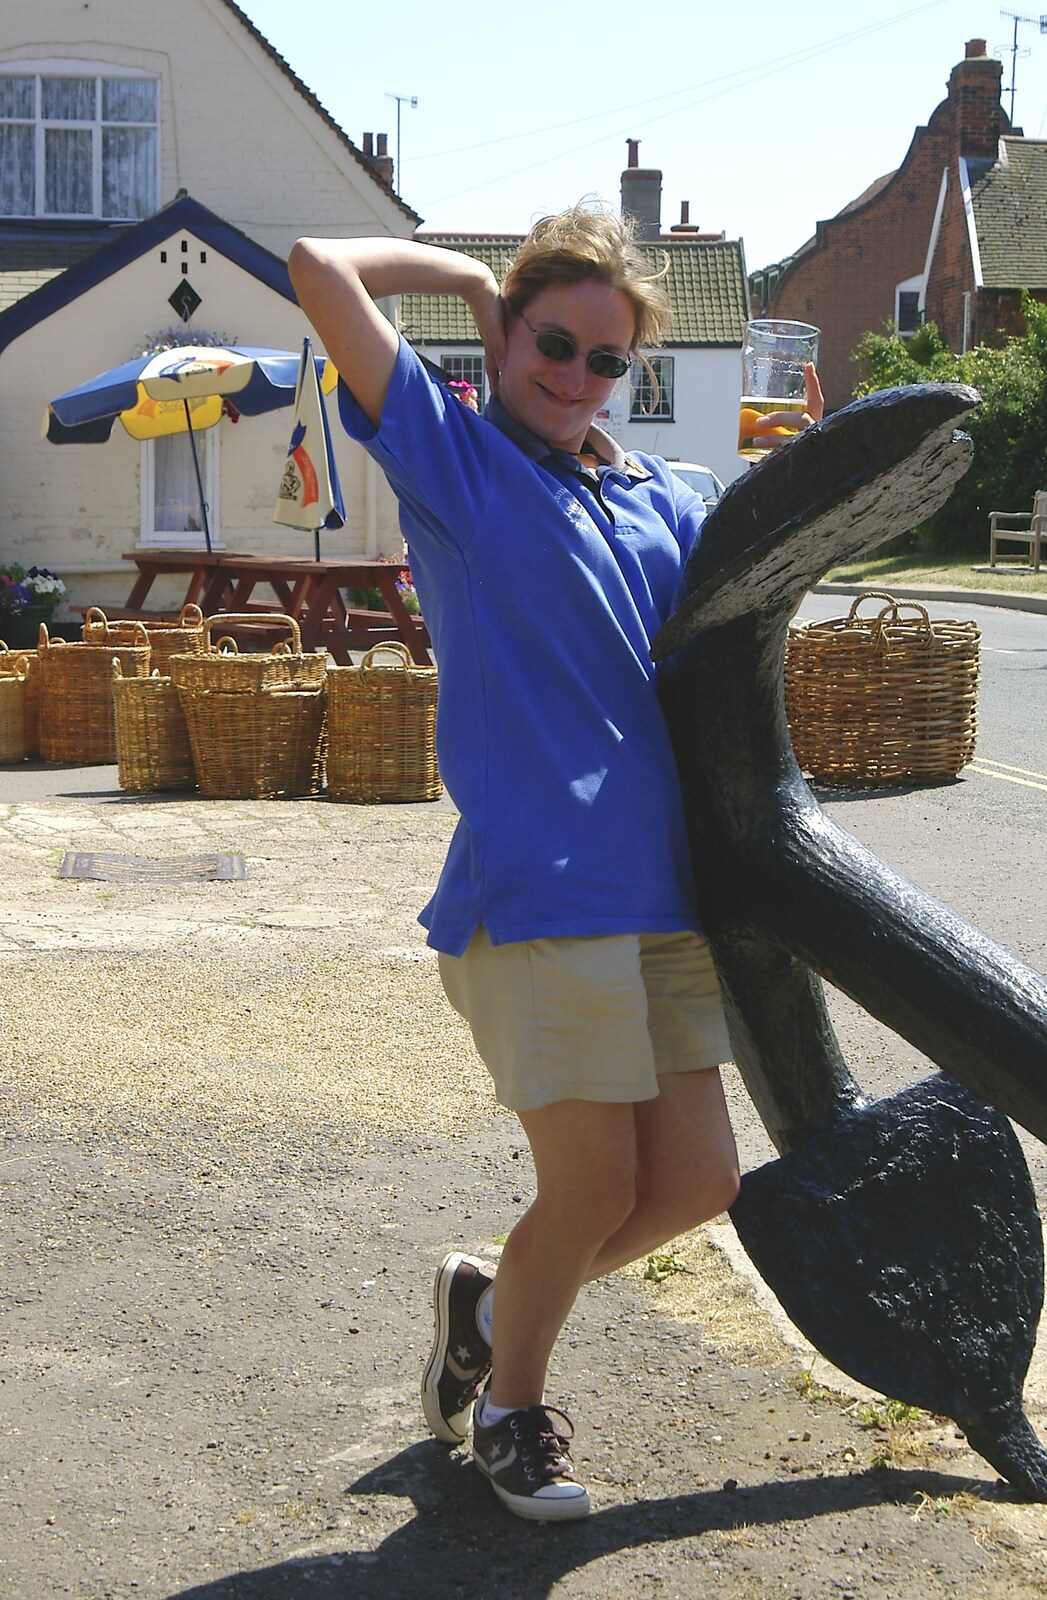 Suey poses by an anchor from The BSCC Charity Bike Ride, Orford, Suffolk - 15th July 2006